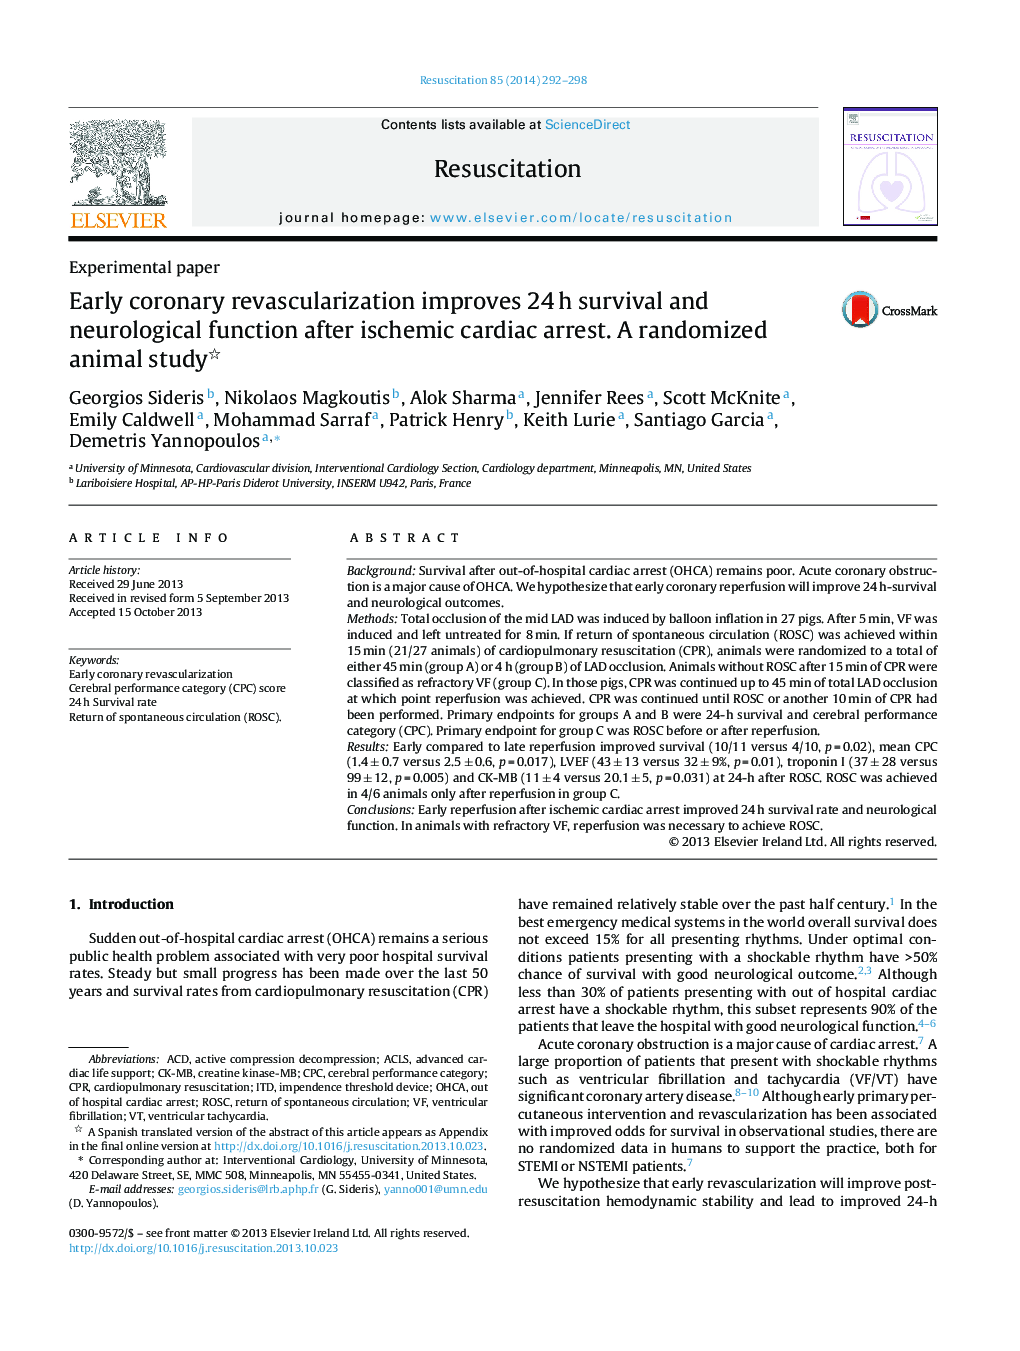 Early coronary revascularization improves 24 h survival and neurological function after ischemic cardiac arrest. A randomized animal study 